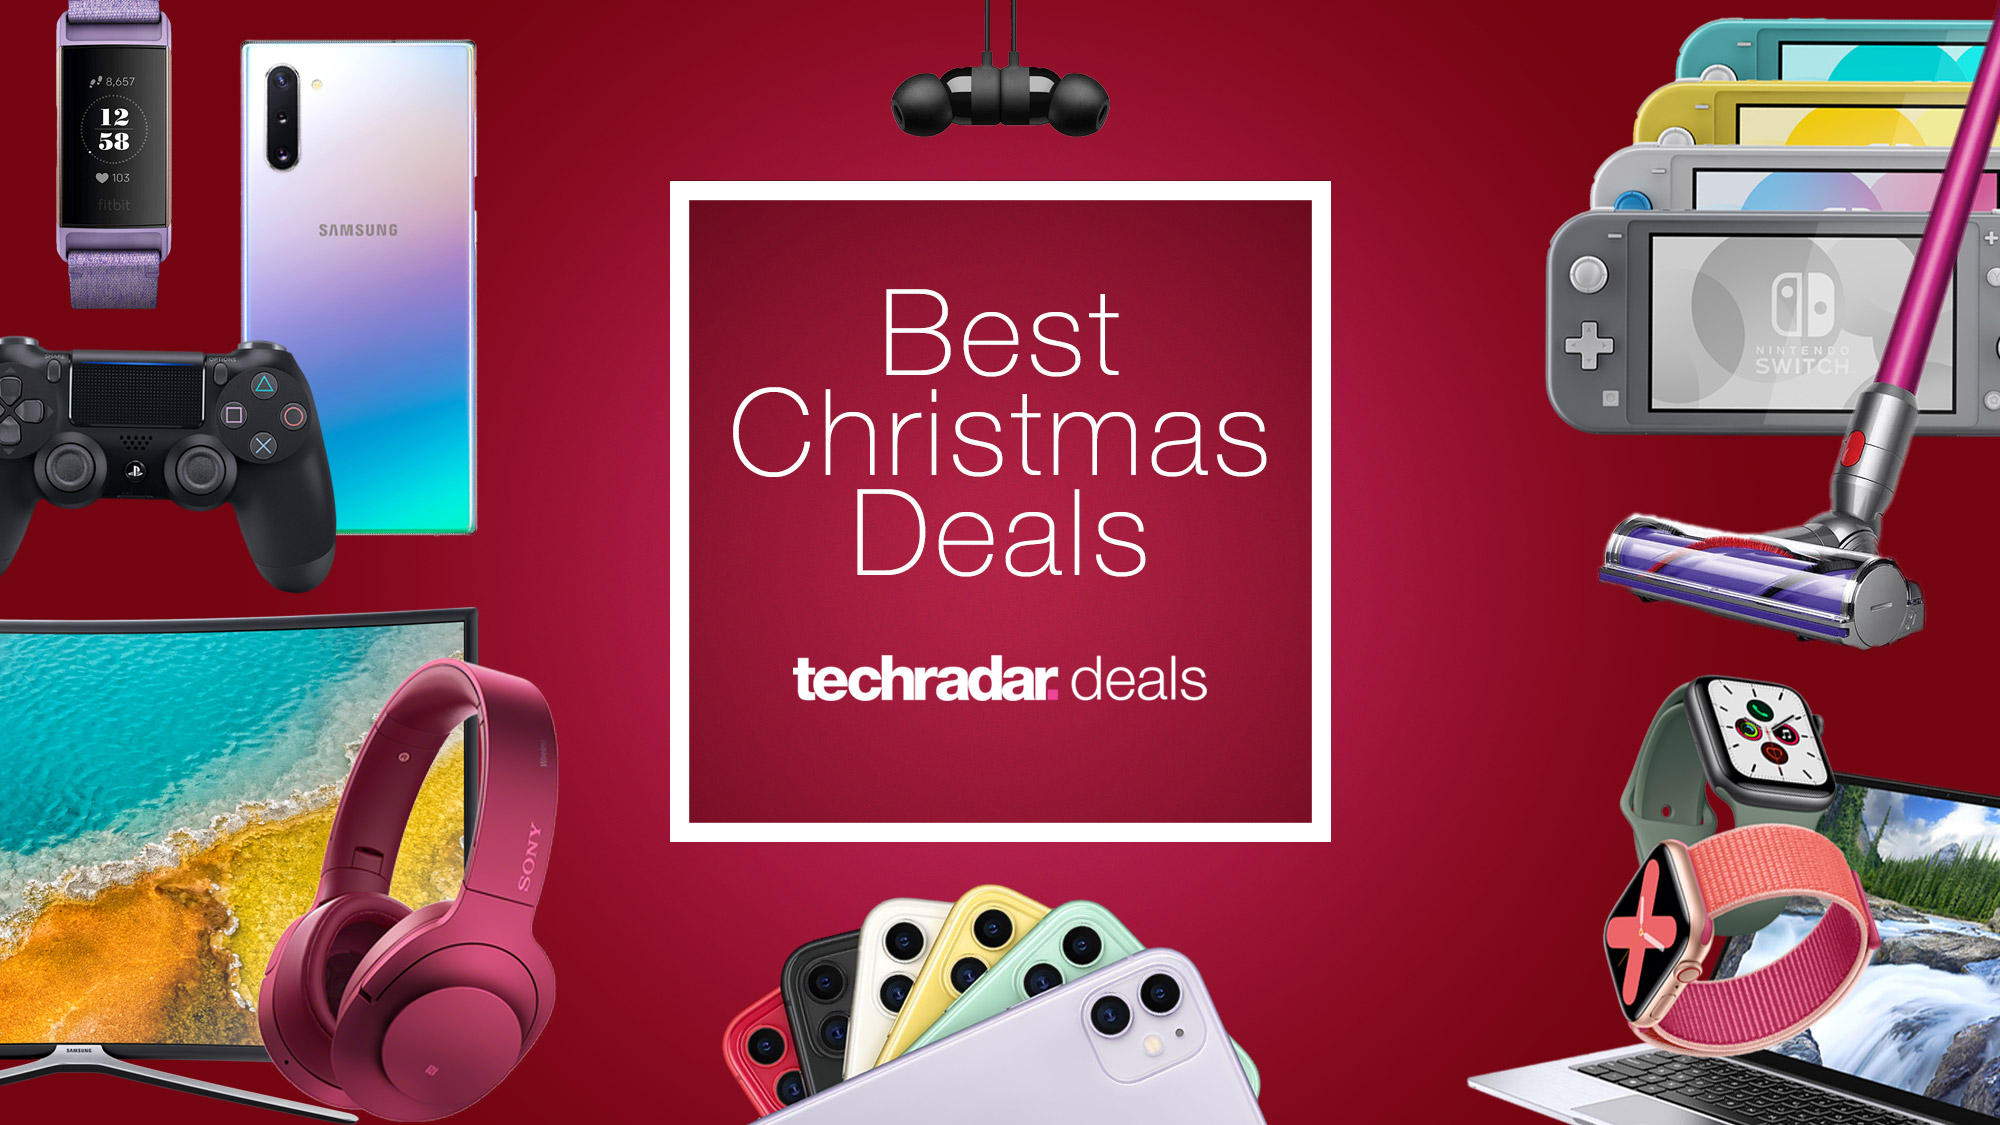 Red background, Christmas gifts around a white box saying 'Christmas deals'